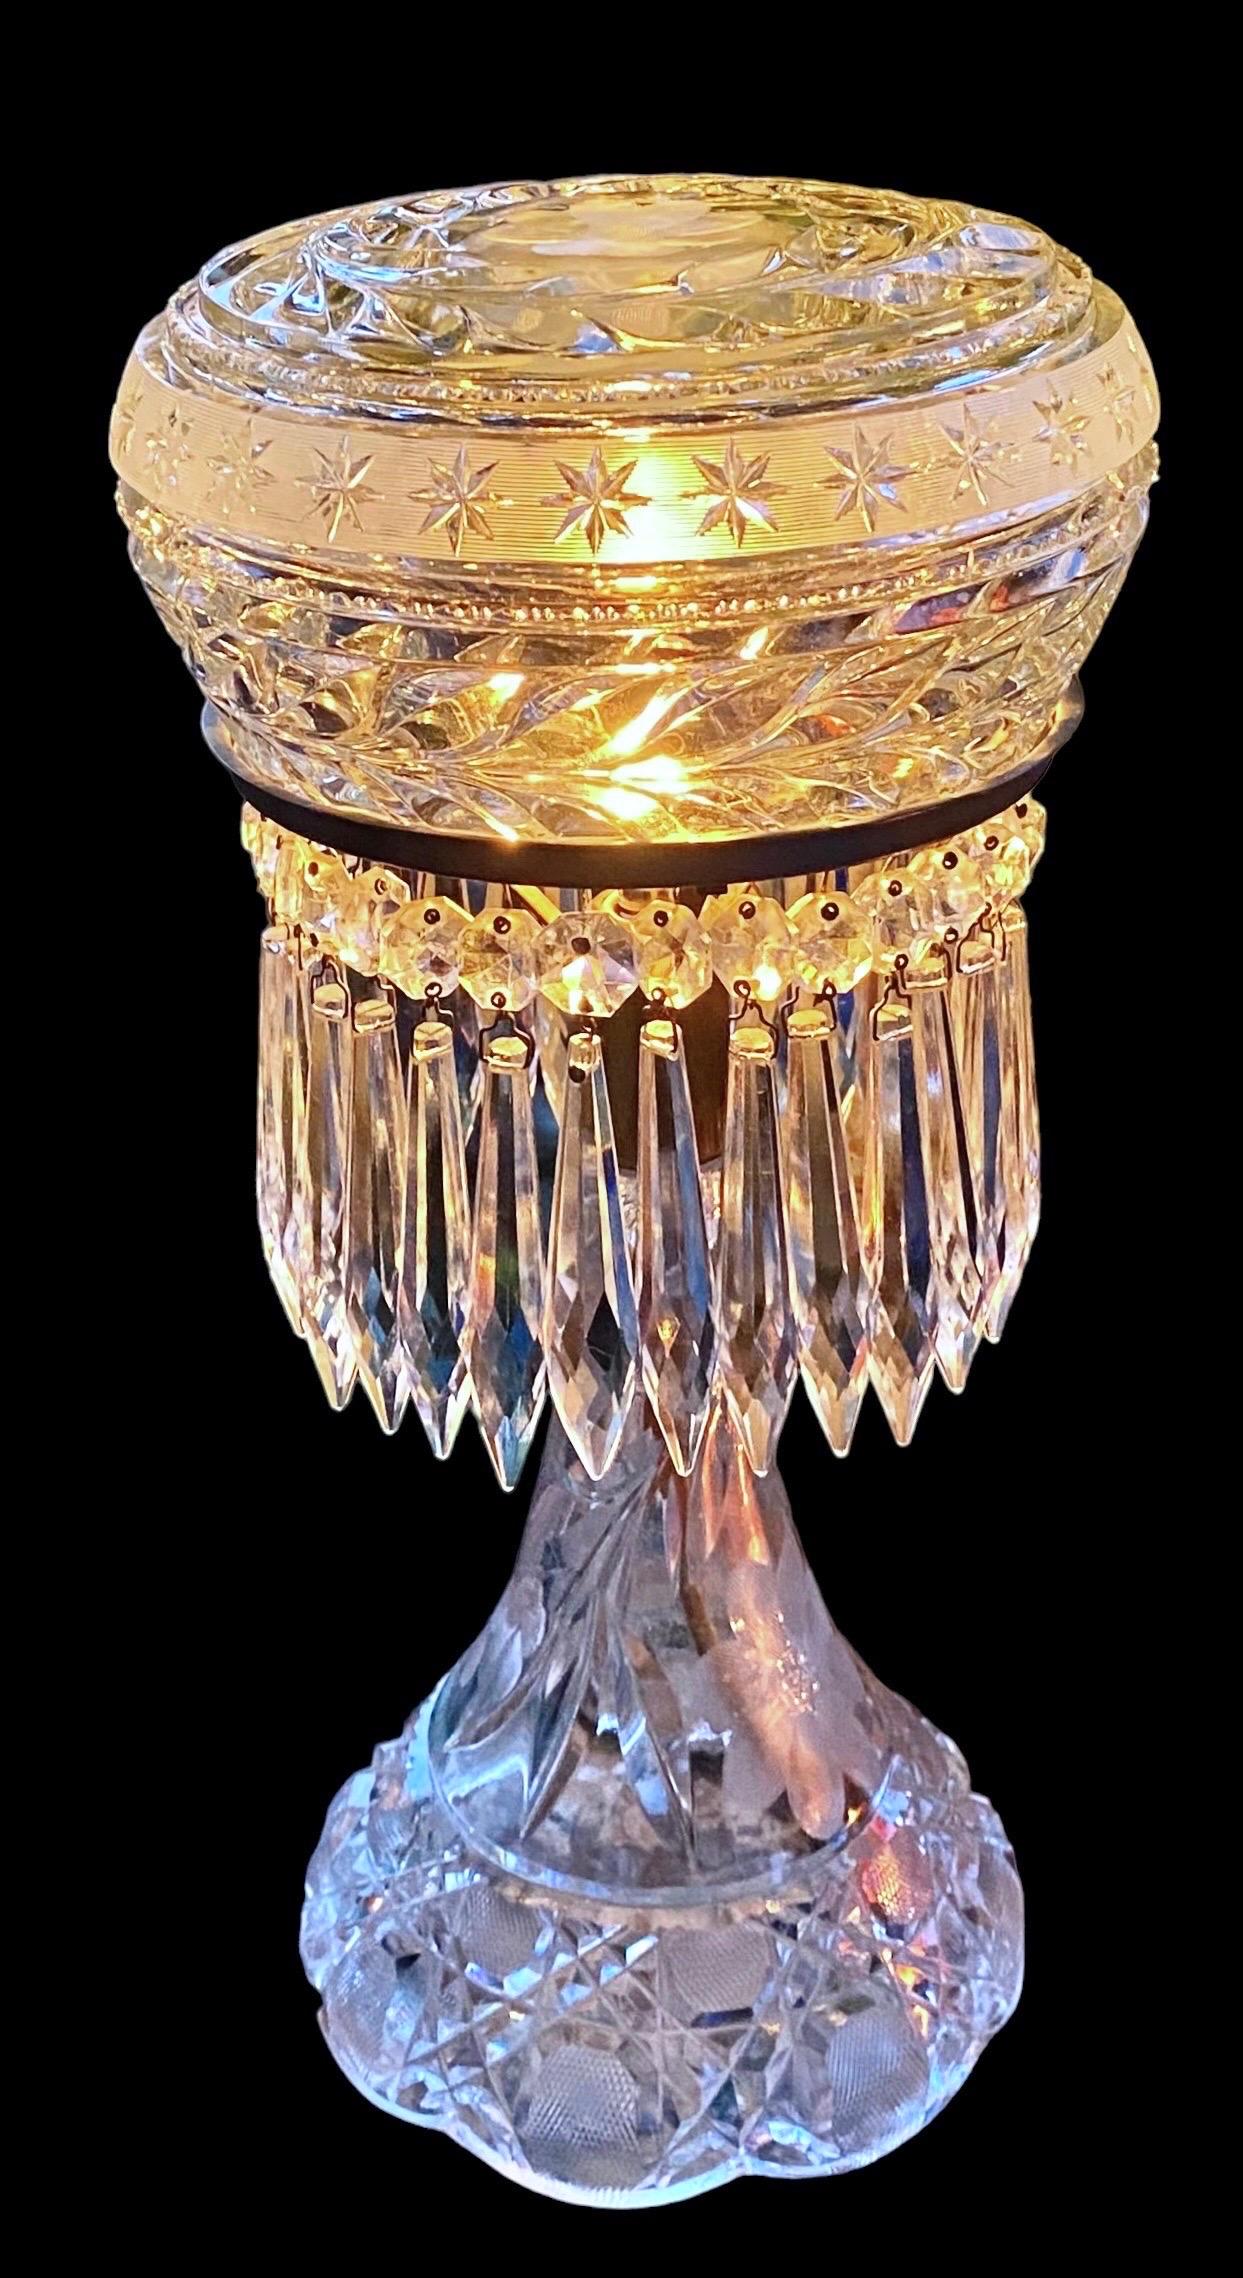 Elaborately cut American Brilliant glass table lamp. The base and shade are original with all around spear hanging crystals. The mount is silver plate and takes a chandelier base light bulb. The is 100% all hand cut and polished by a master cutter